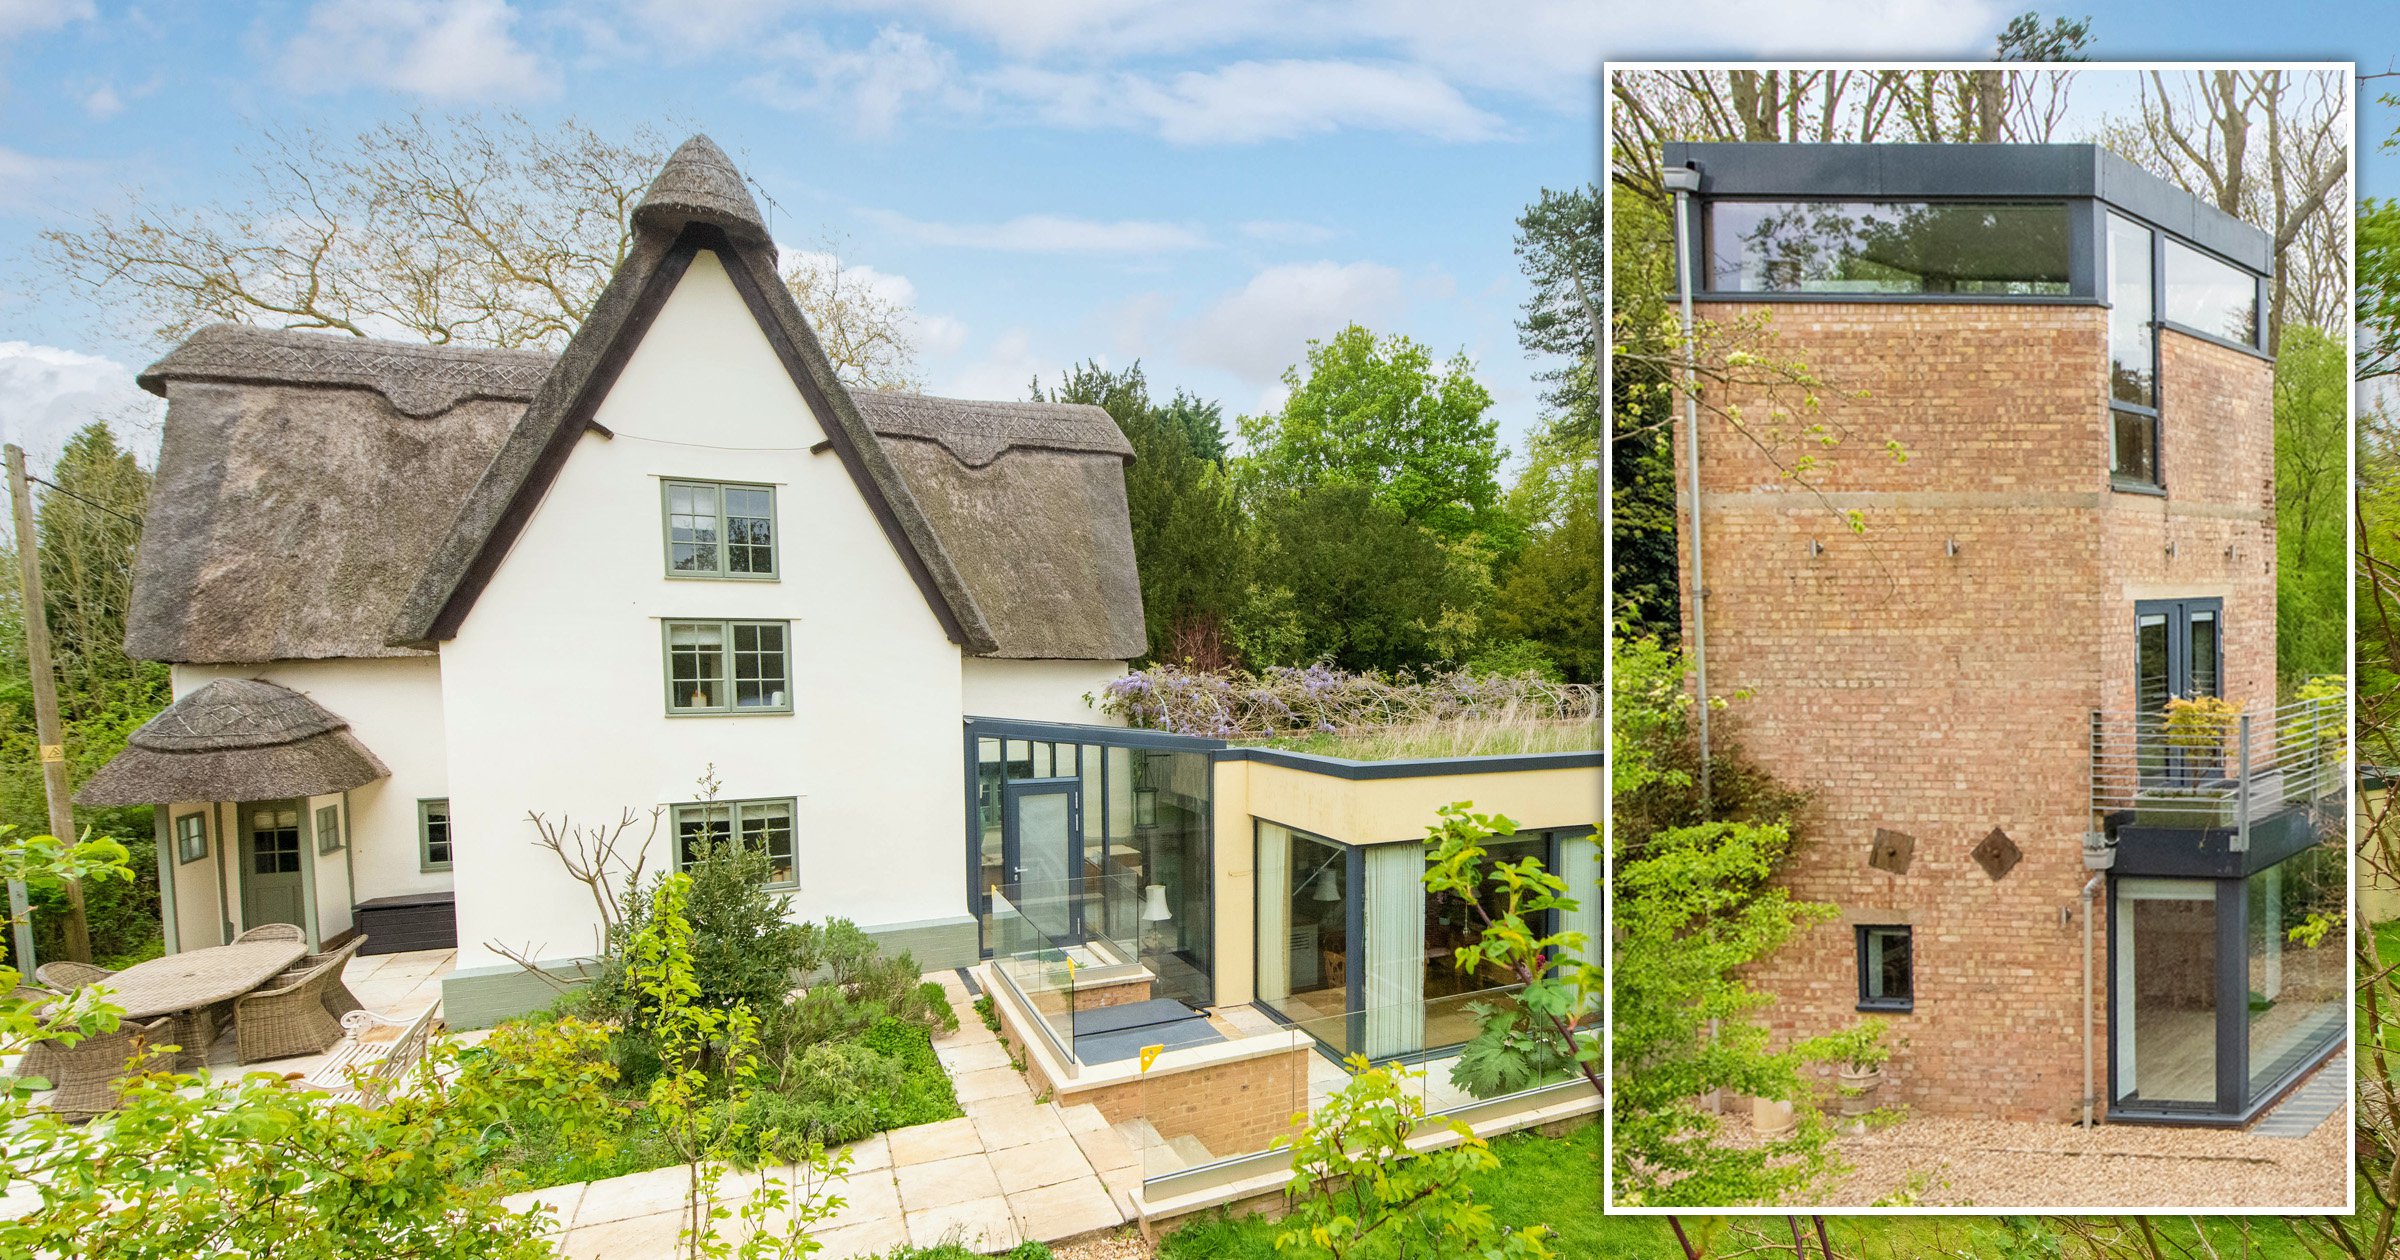 Grade II listed cottage with converted water tower in the garden on sale for £1.75million